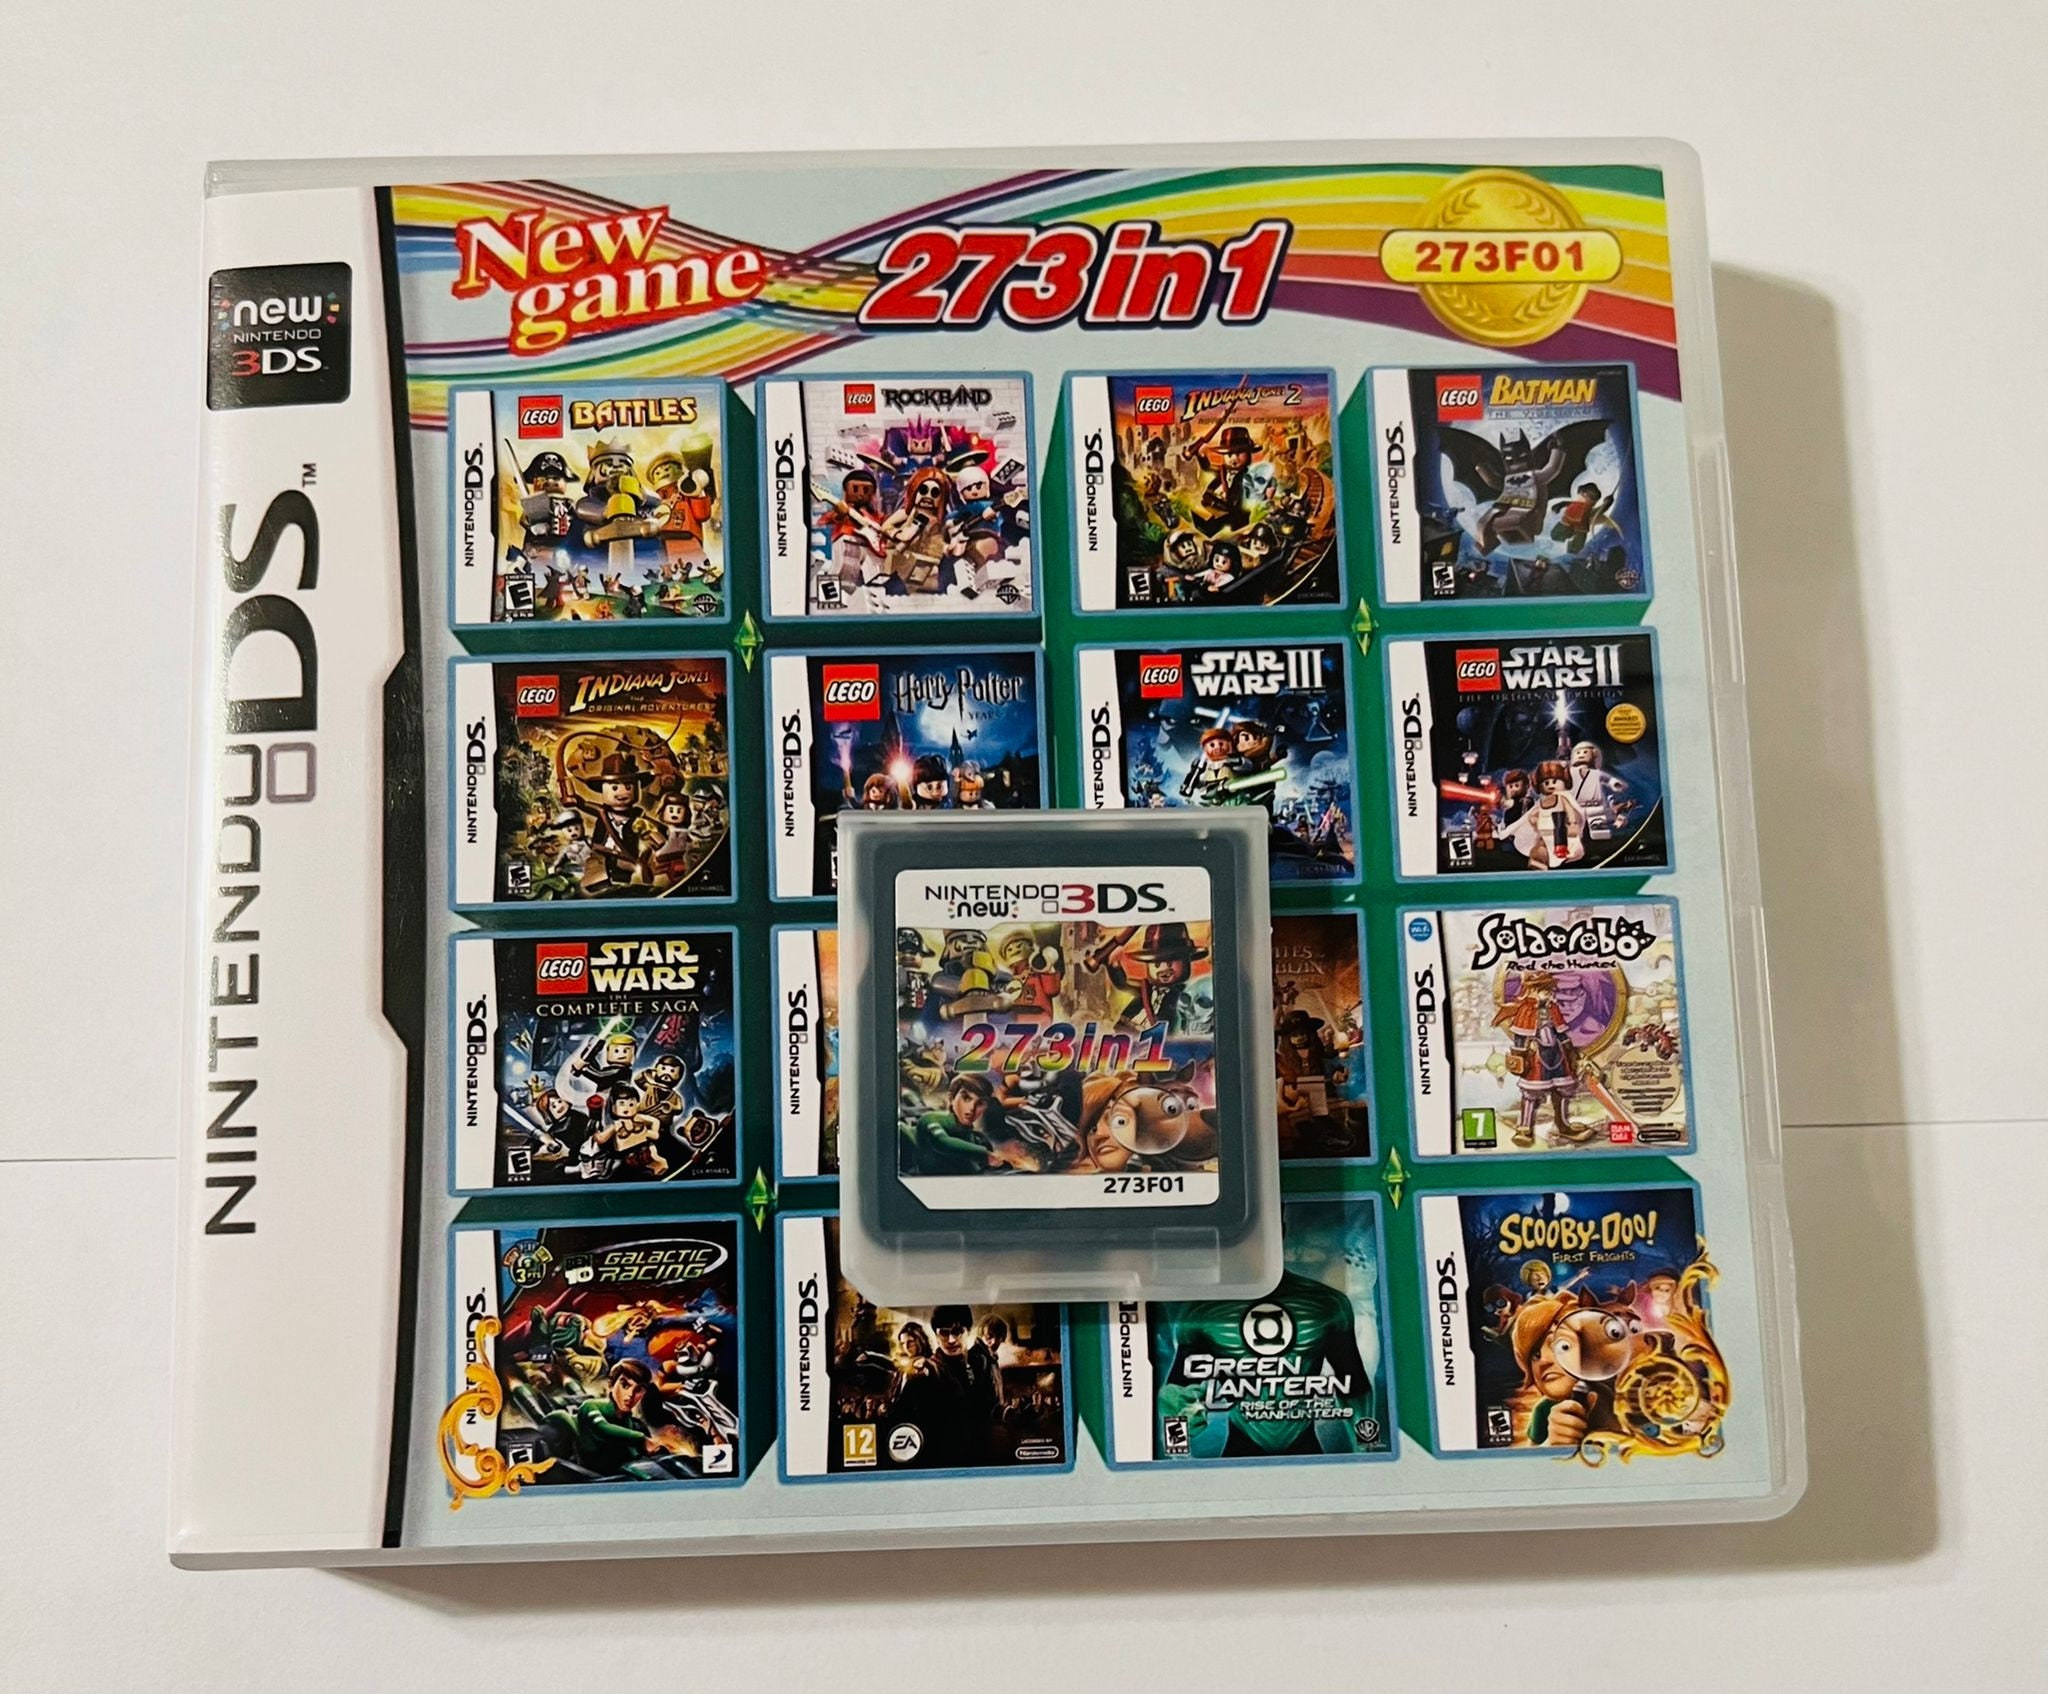 273 in 1 Super Combo All in 1 Game Cart Games Cartridge for